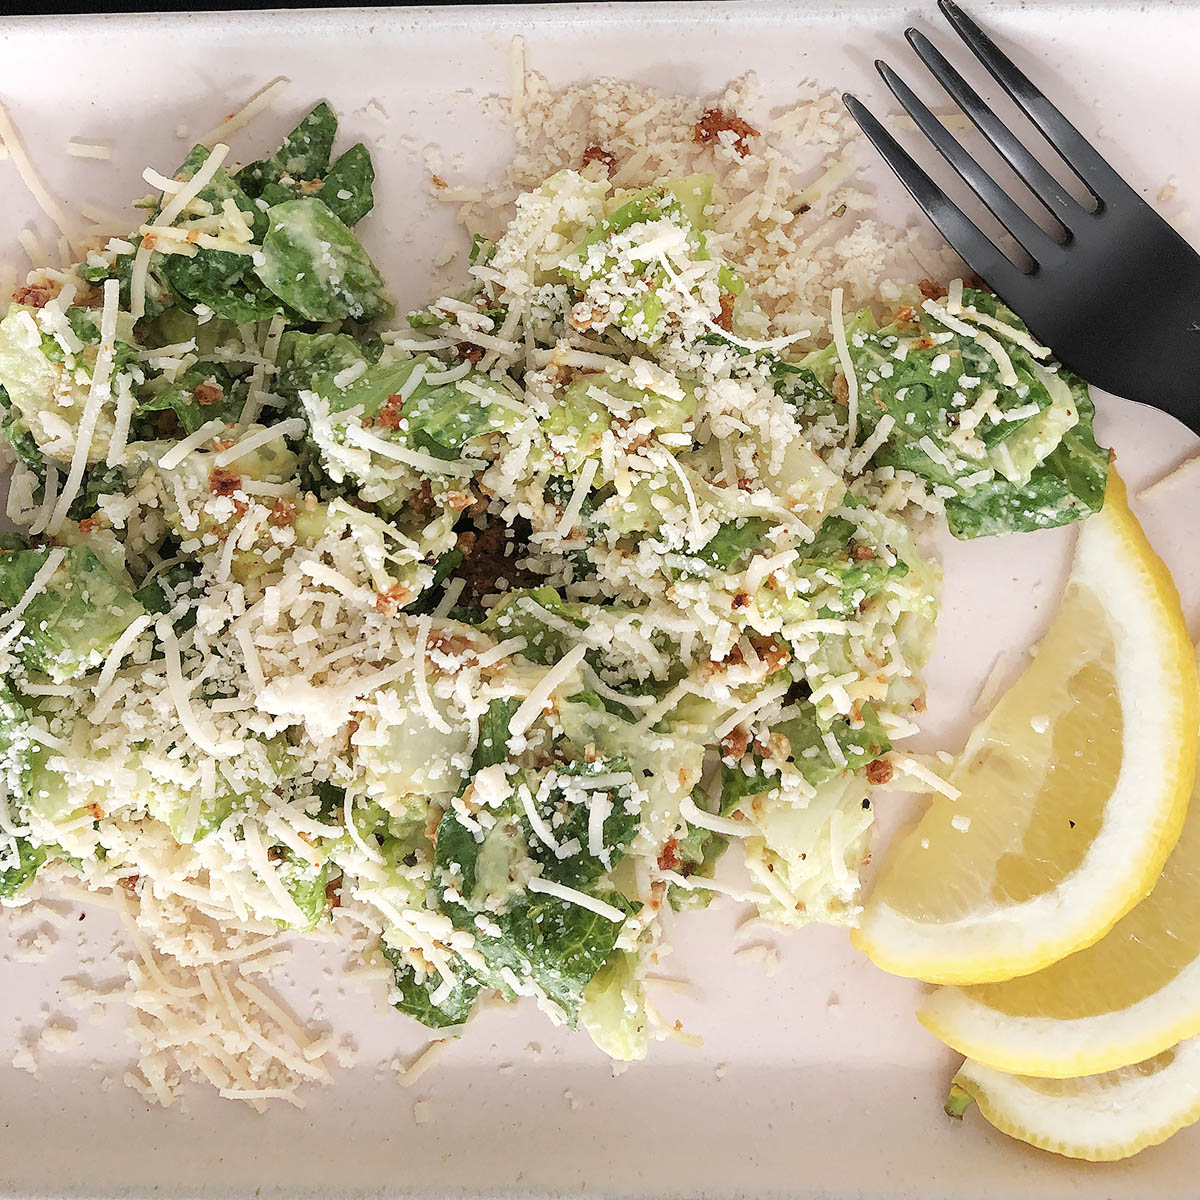 Top-down view of Plant-based Caesar Salad in a black bowl. Salad is garnished with lemon slices.